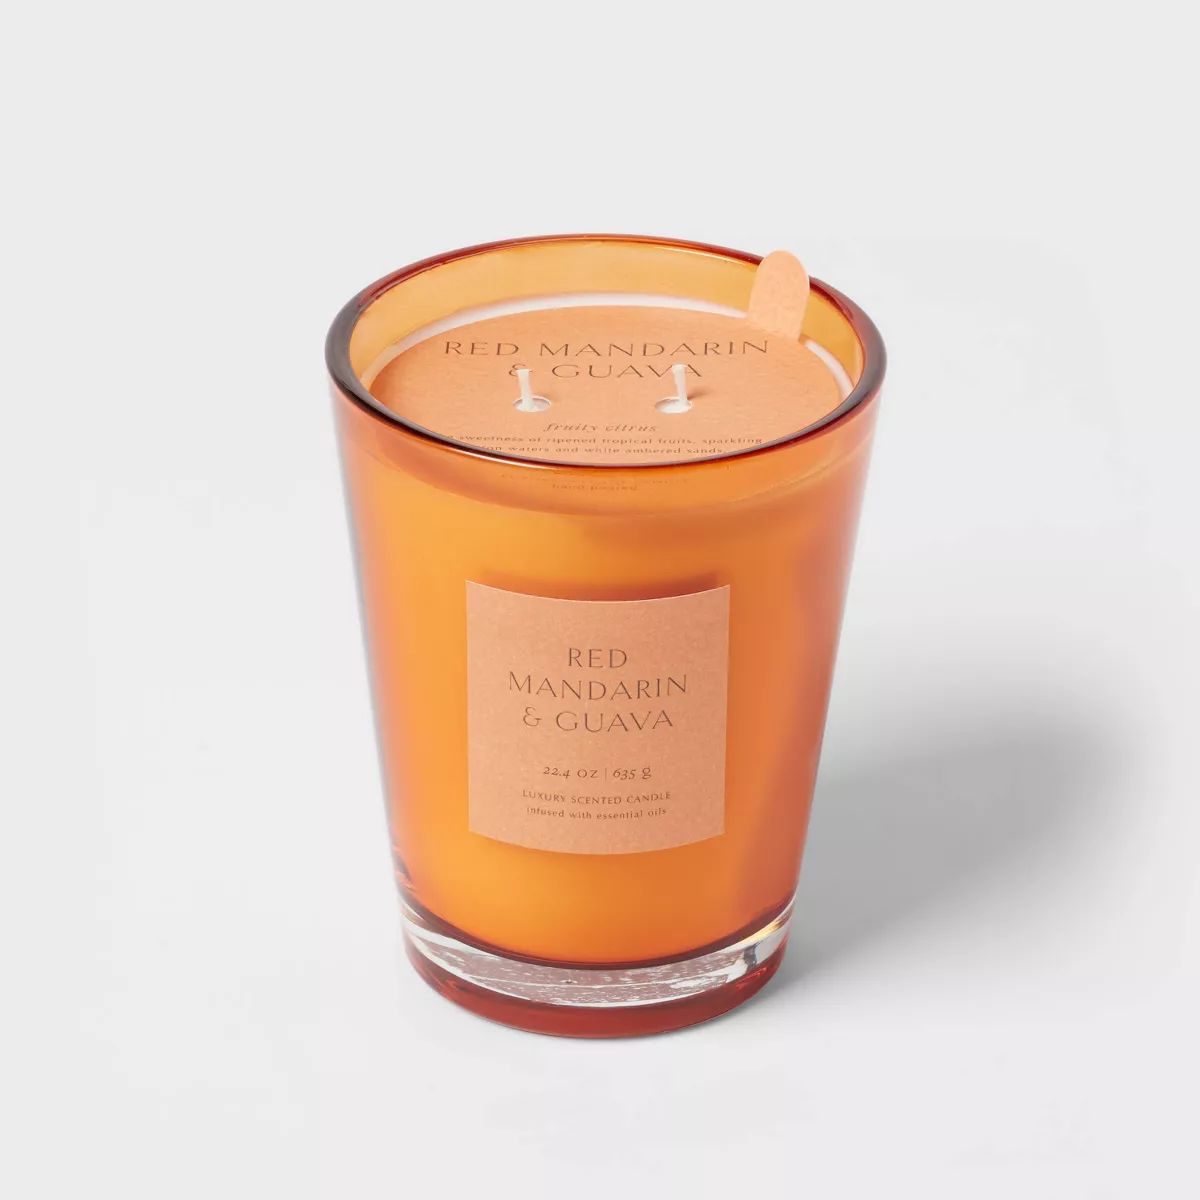 Colored Vase Glass with Dustcover Mandarin & Guava Candle Orange - Threshold™ | Target